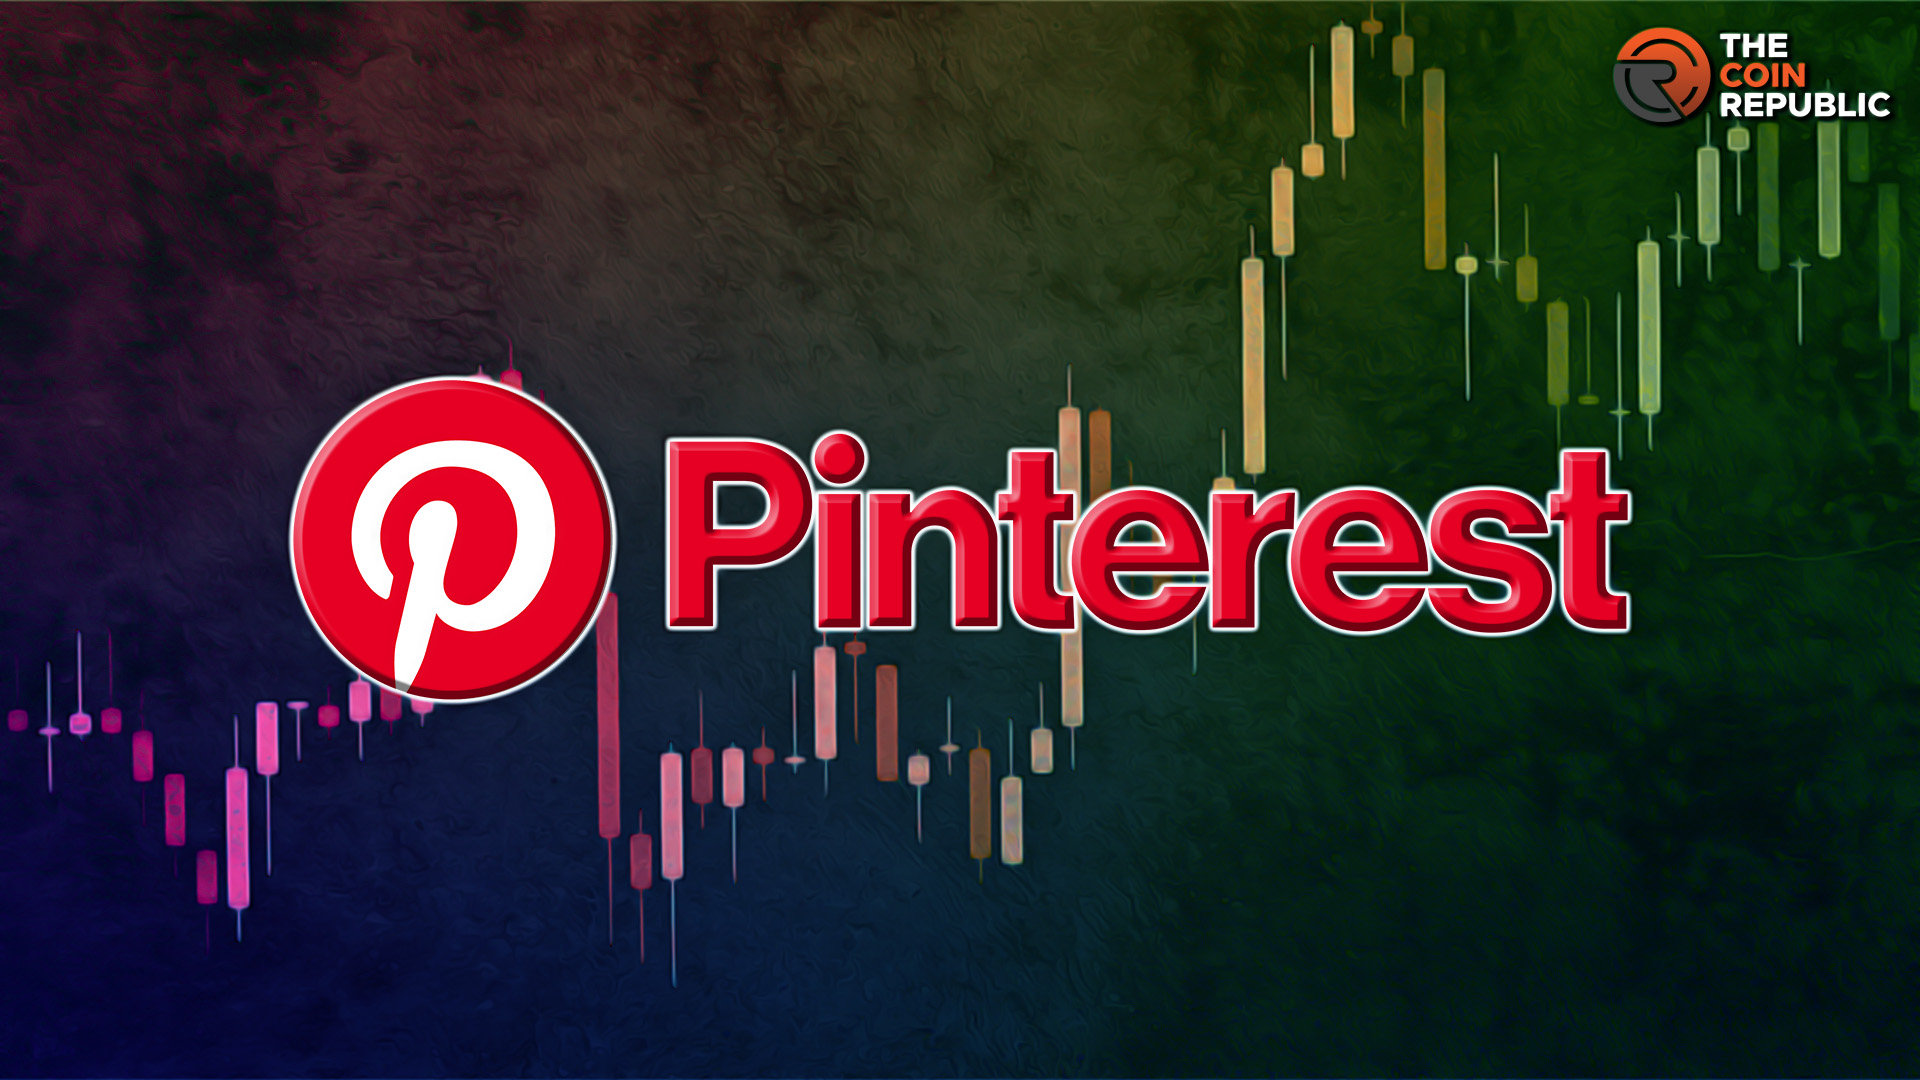 Pinterest Stock Forecast: Is (NYSE: PINS) Stock A Good Choice?